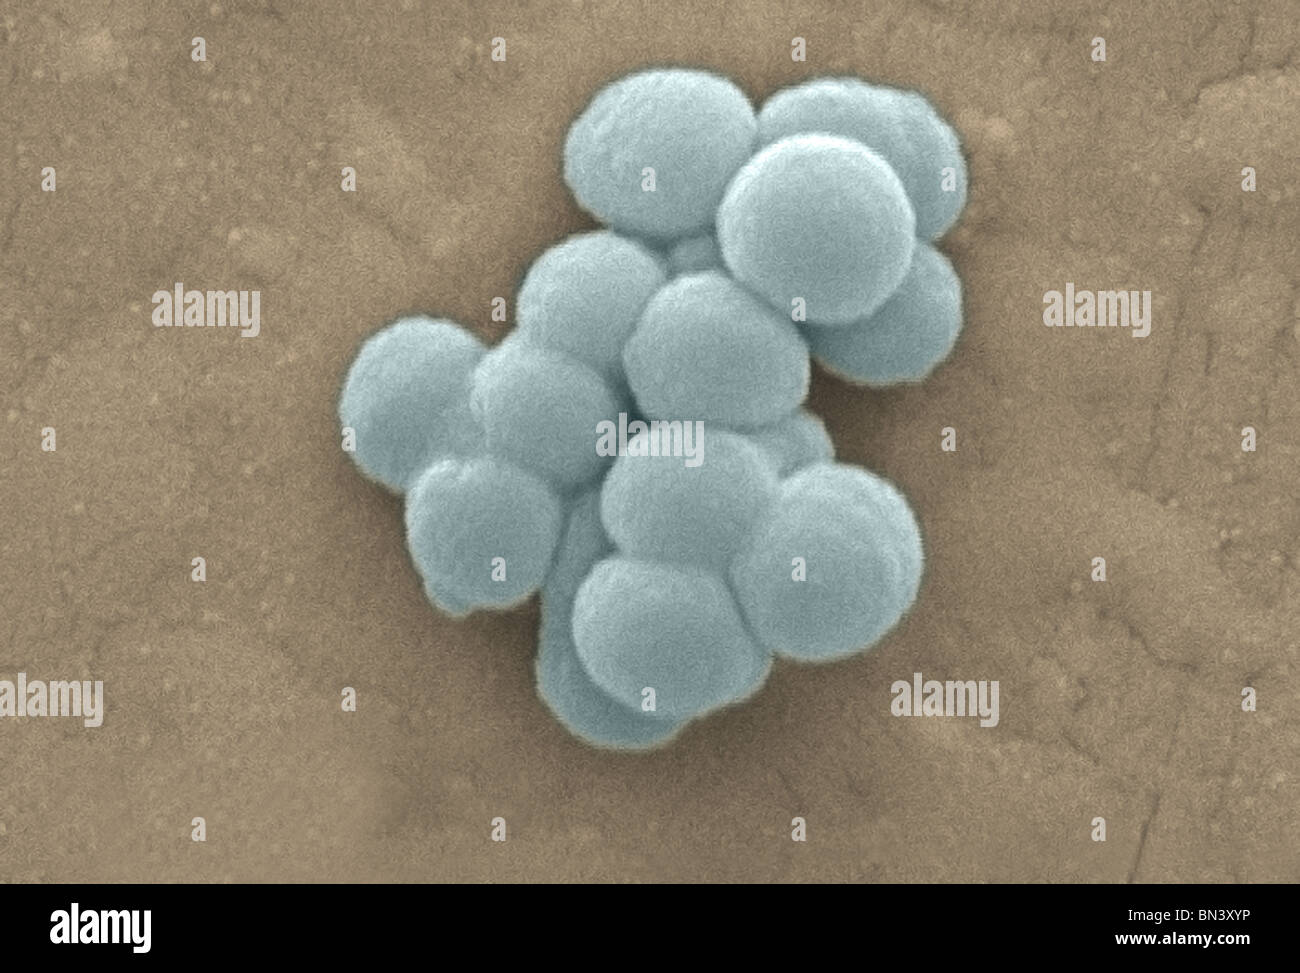 Scanning electron micrograph (SEM) of a clustered group of Gram-positive, beta-hemolytic Group C Streptococcus bacteria Stock Photo